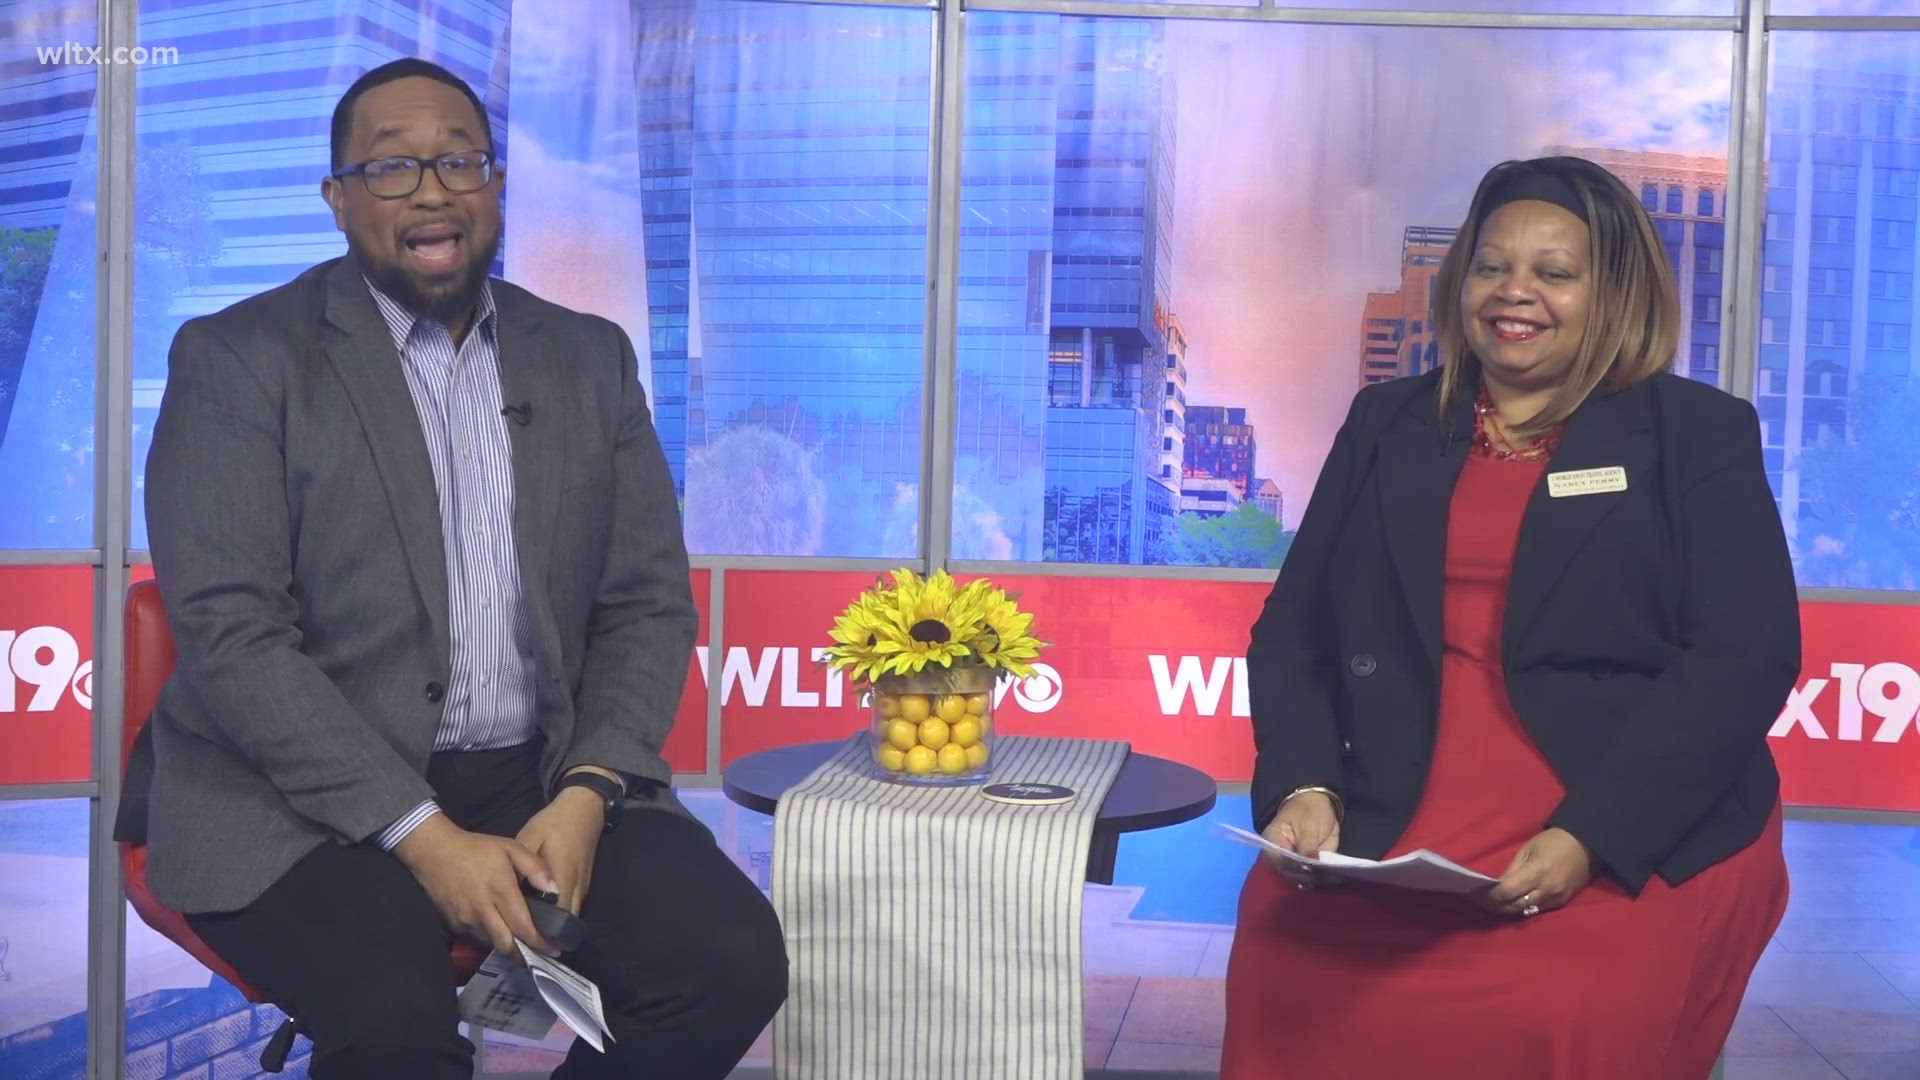 Nancy Perry, owner of A World Away travel agency, answered questions from WLTX viewers about destinations, savings and more